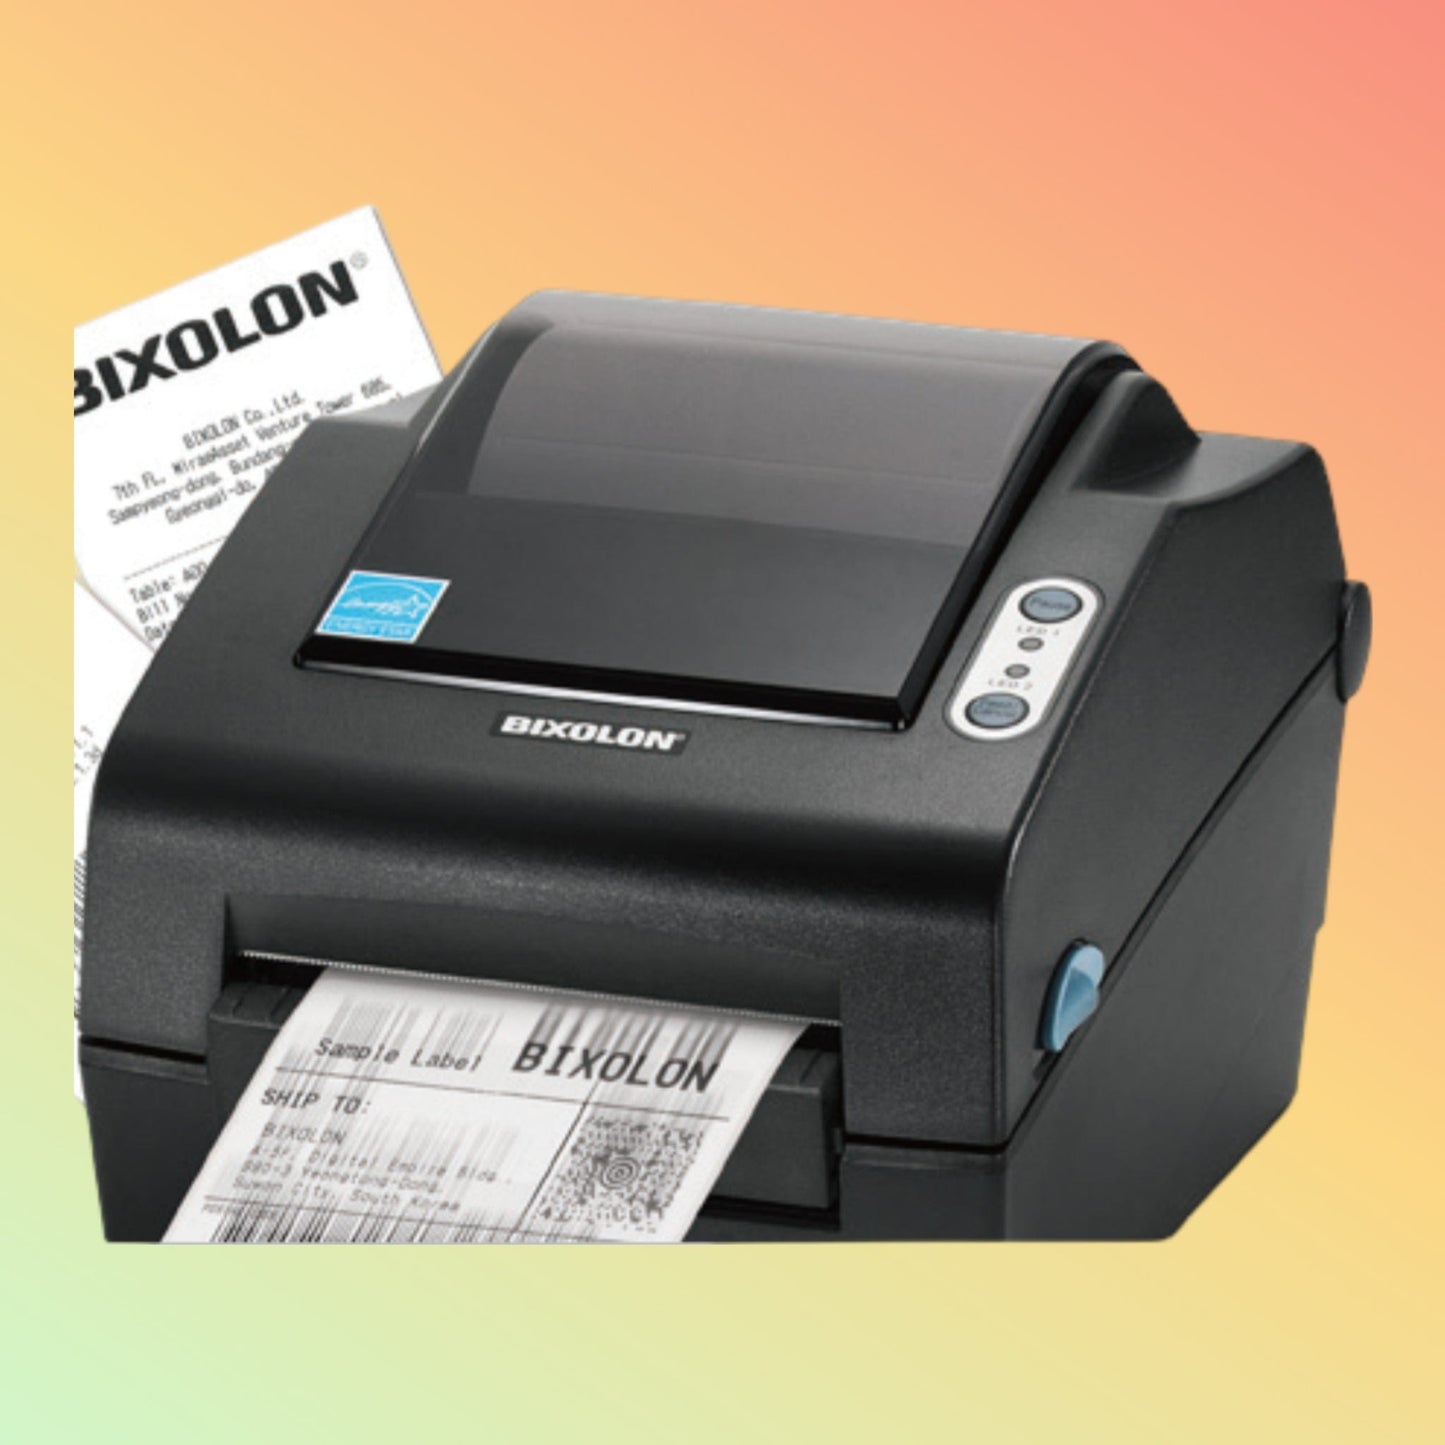 "Reliable BIXOLON SLP-T400 with 203/300 dpi options, broad media compatibility, enhancing productivity with durable labels."